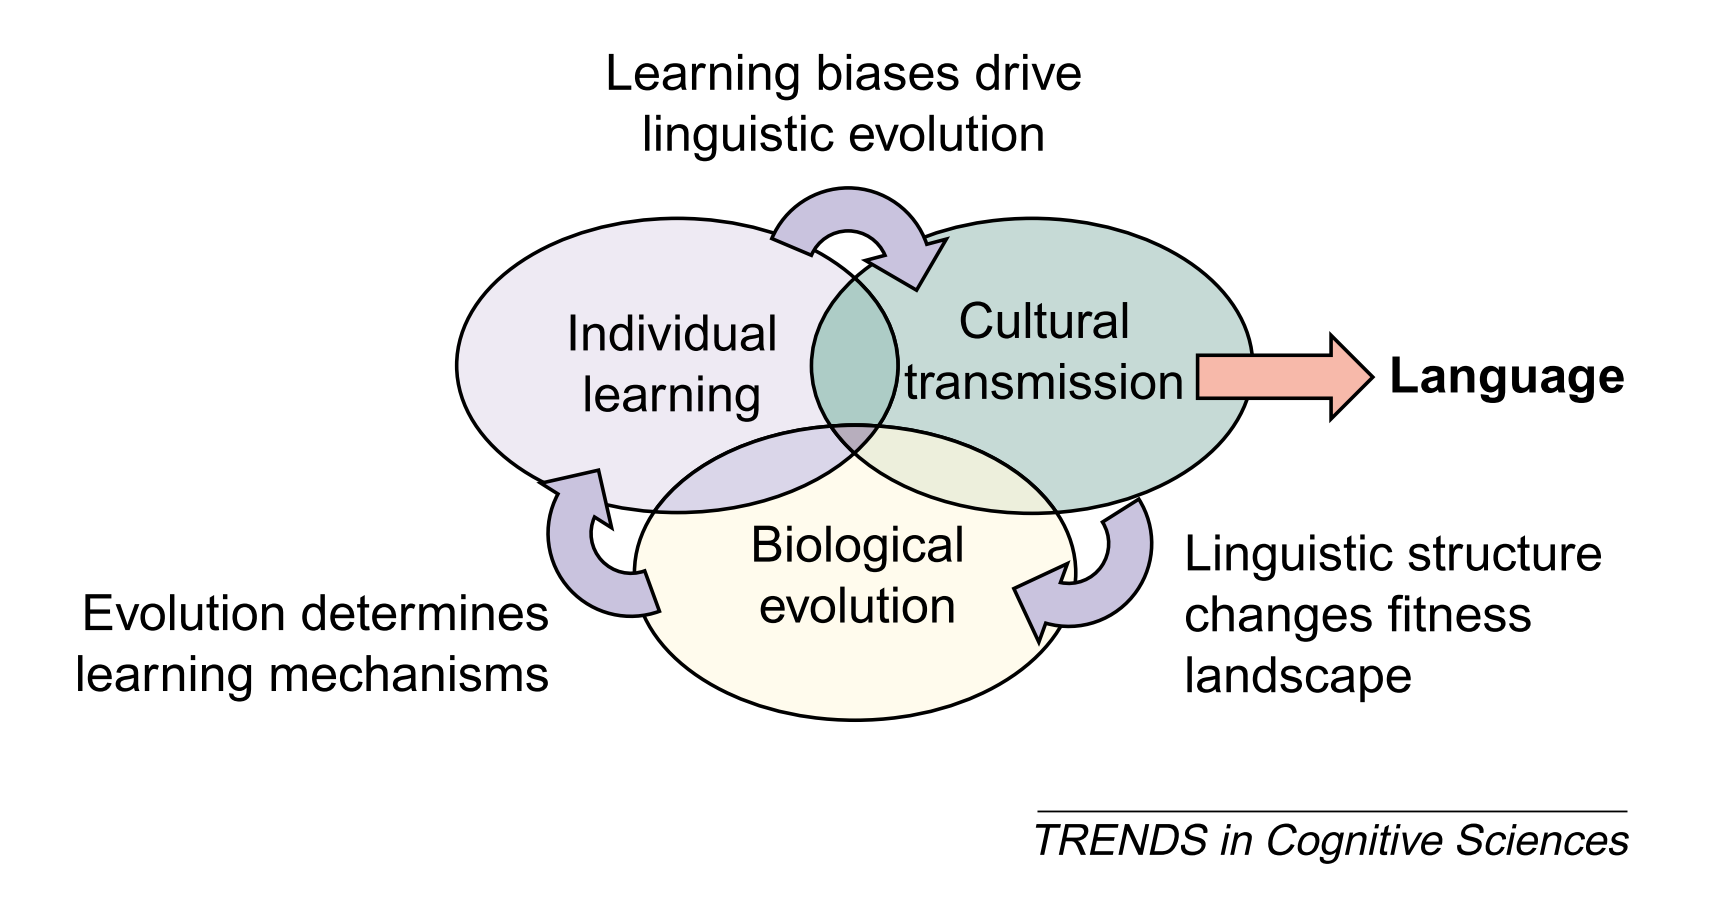 Co-evolution of Language and Agent